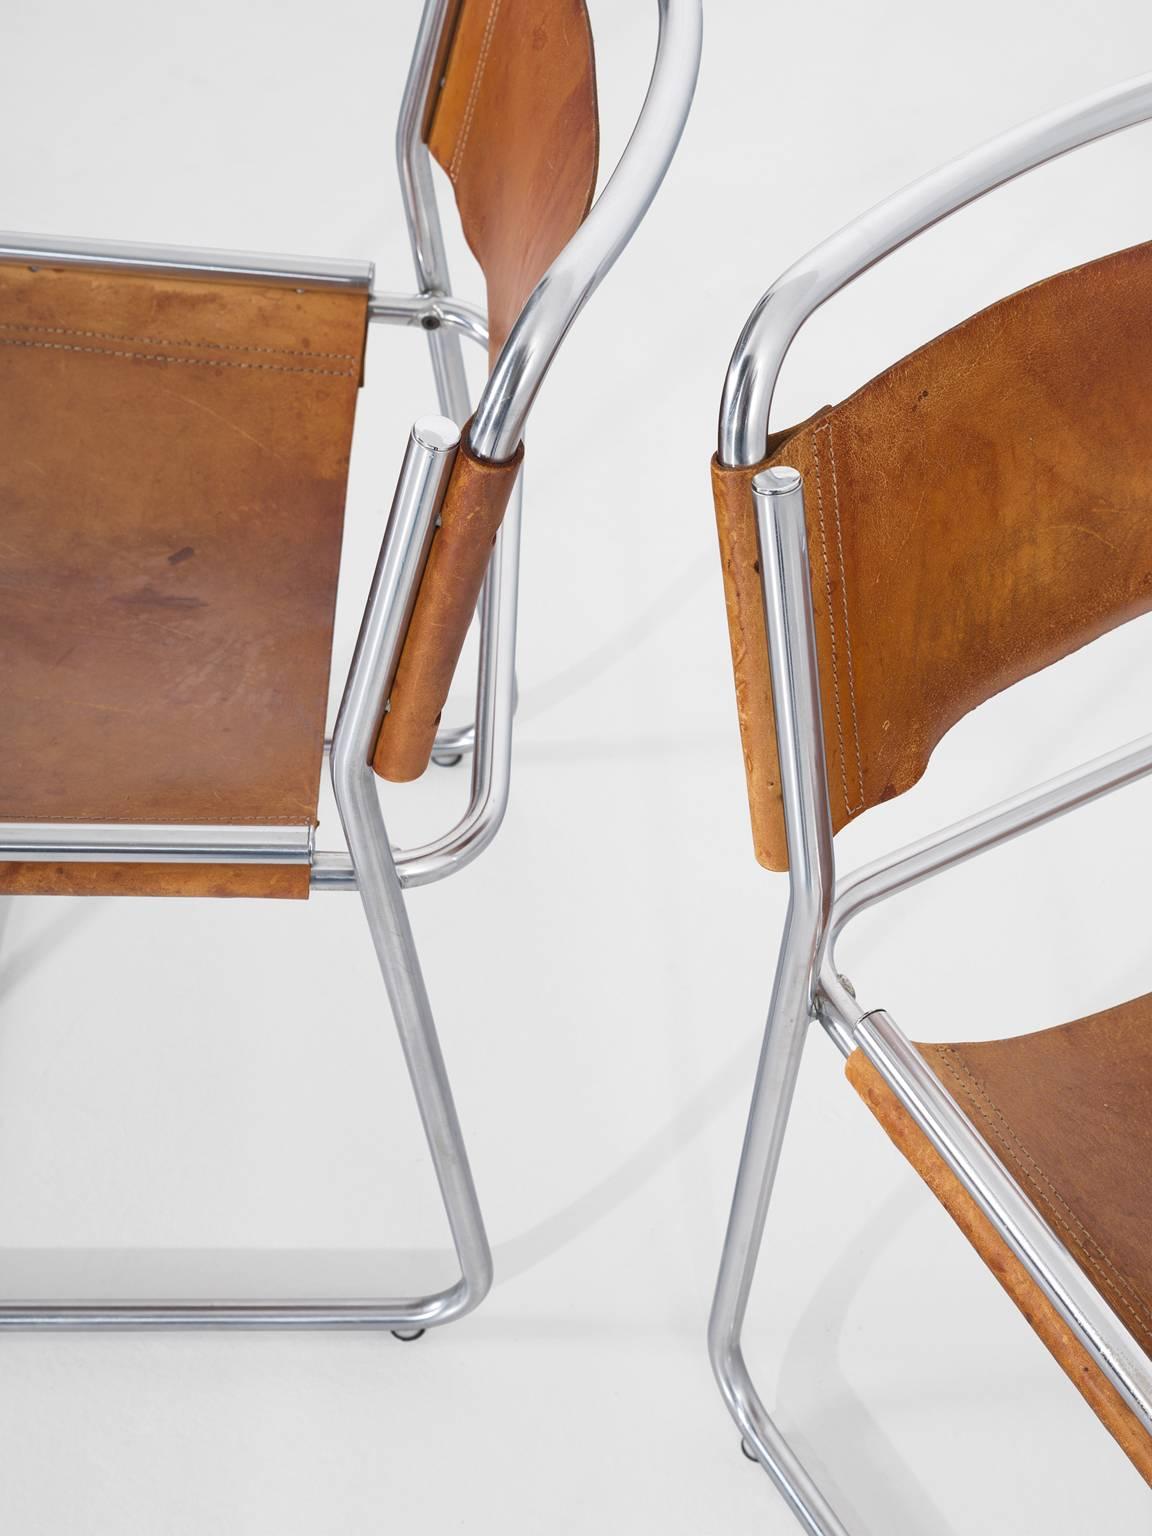 Late 20th Century Clair Bataille & Paul Ibens Set of 6 Tubular Chairs in Cognac for 't Spectrum 